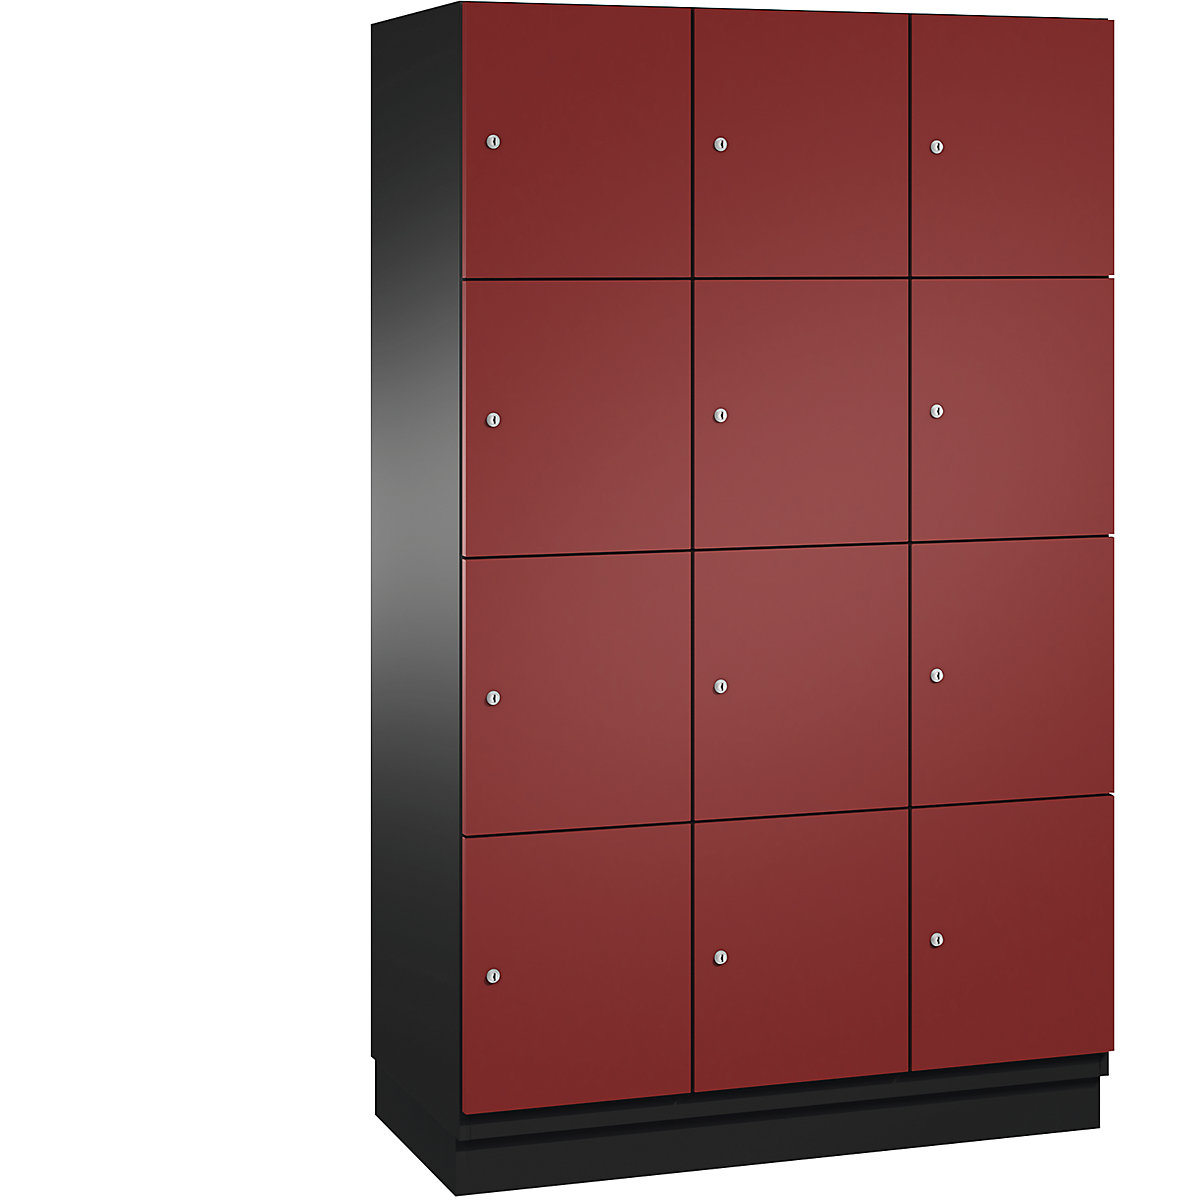 CAMBIO compartment locker with sheet steel doors – C+P, 12 compartments, width 1200 mm, body black grey / door ruby red, compartment height 462.5 mm-13